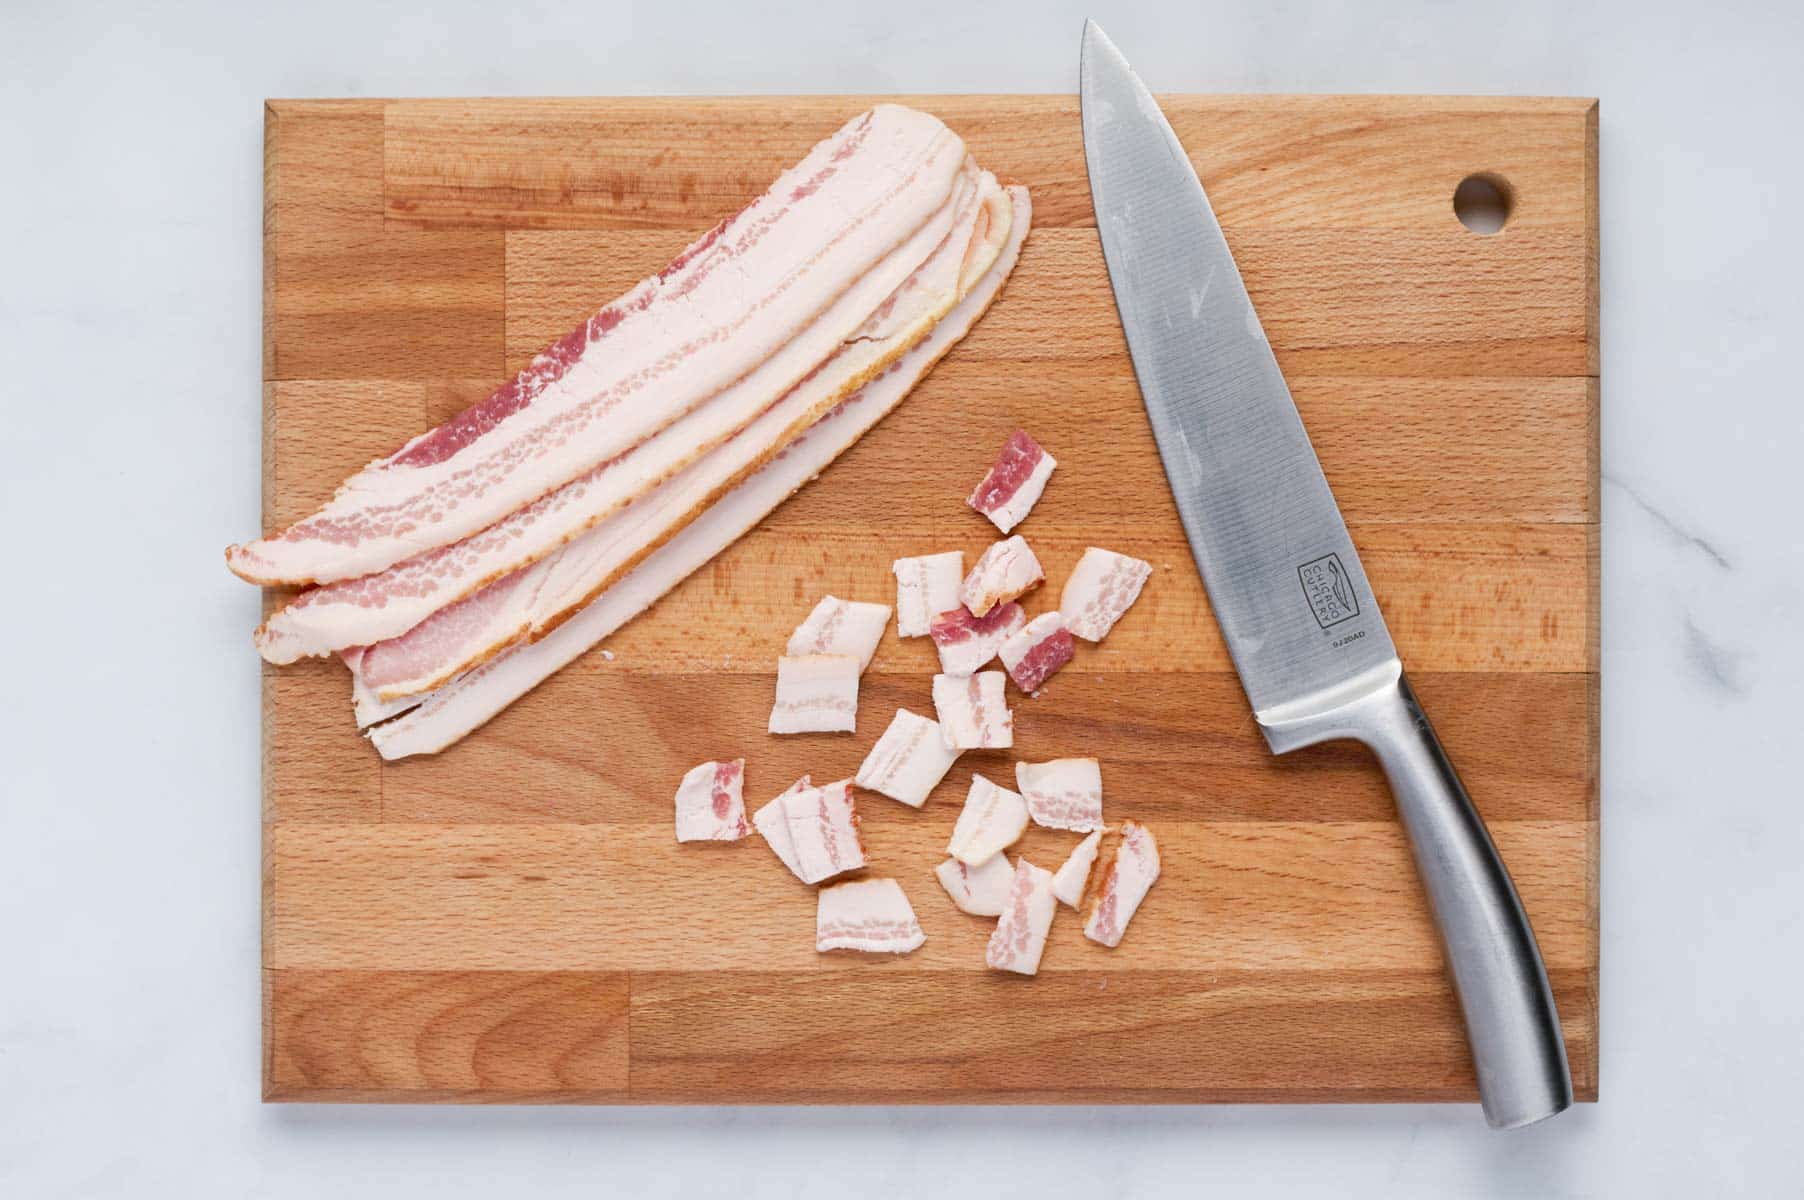 Bacon slices are chopped with a knife.